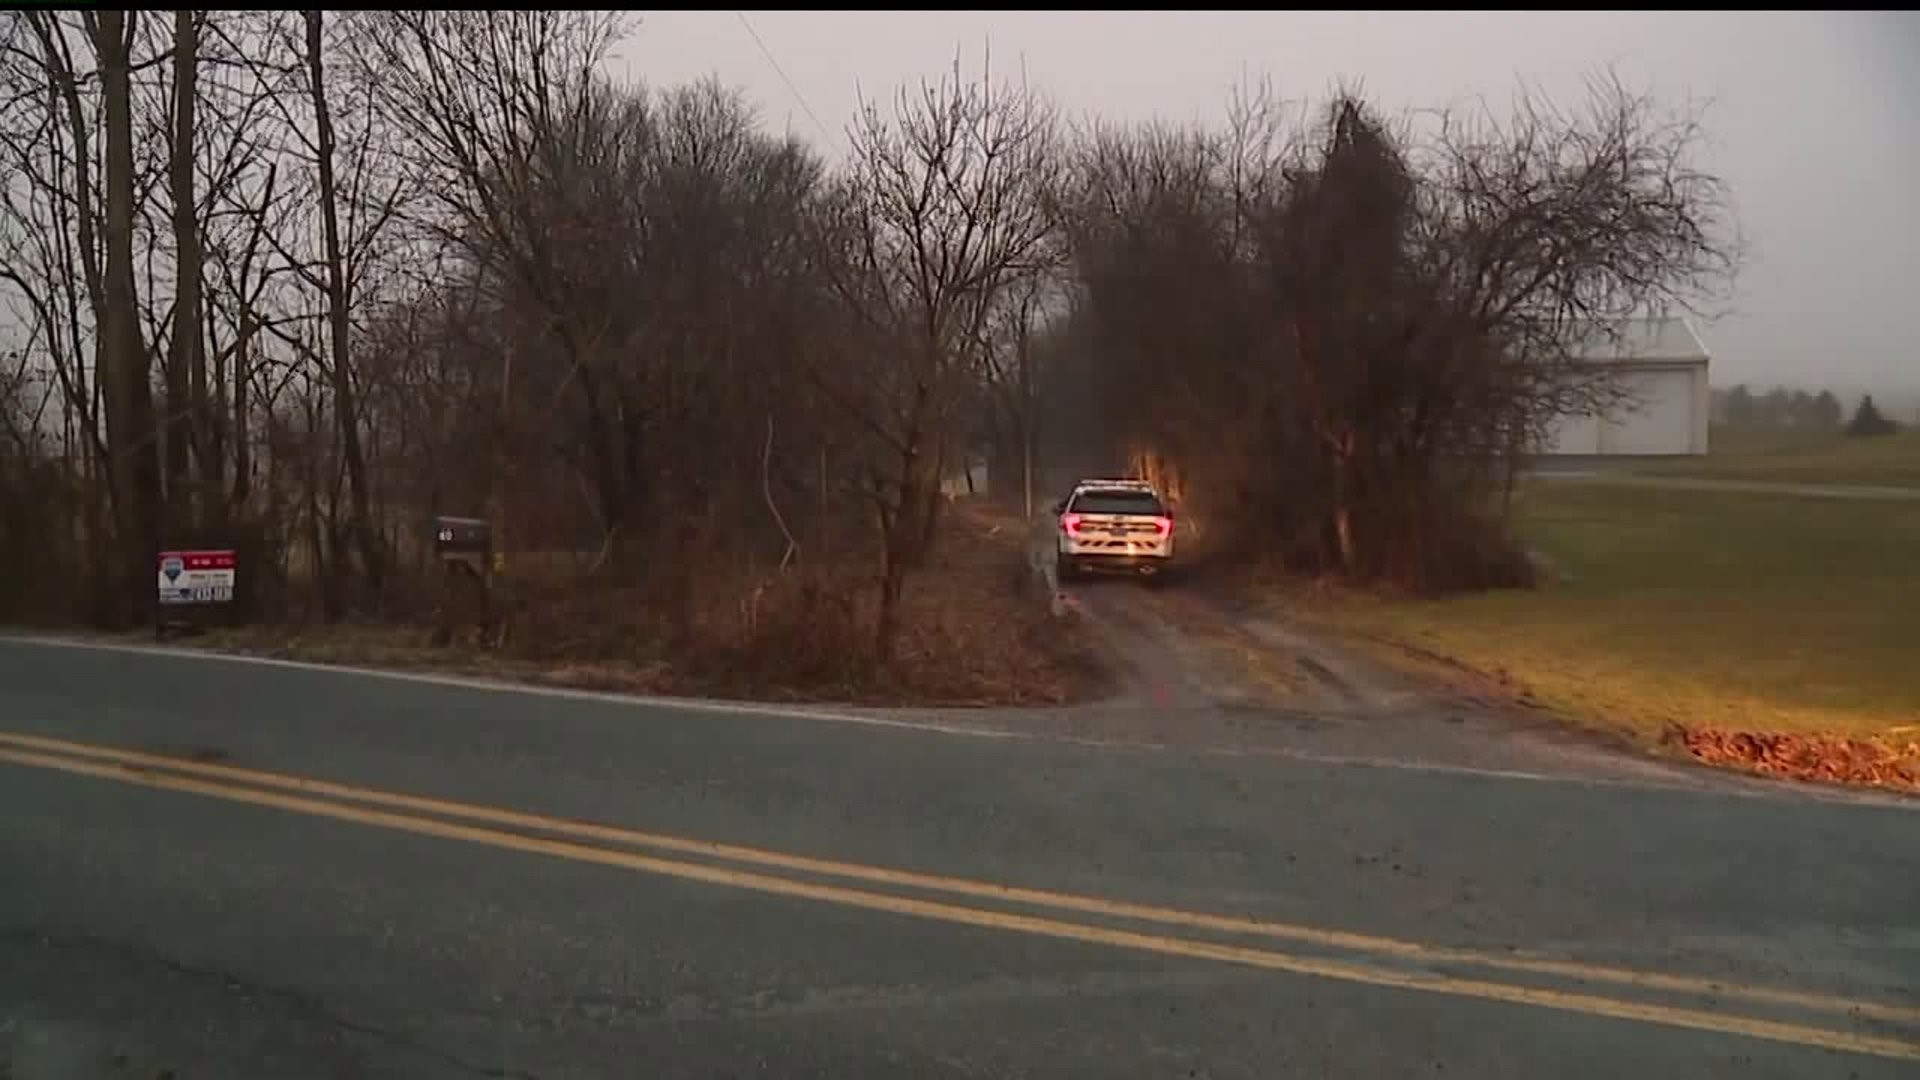 Coroner called, police on the scene of reported incident in York County